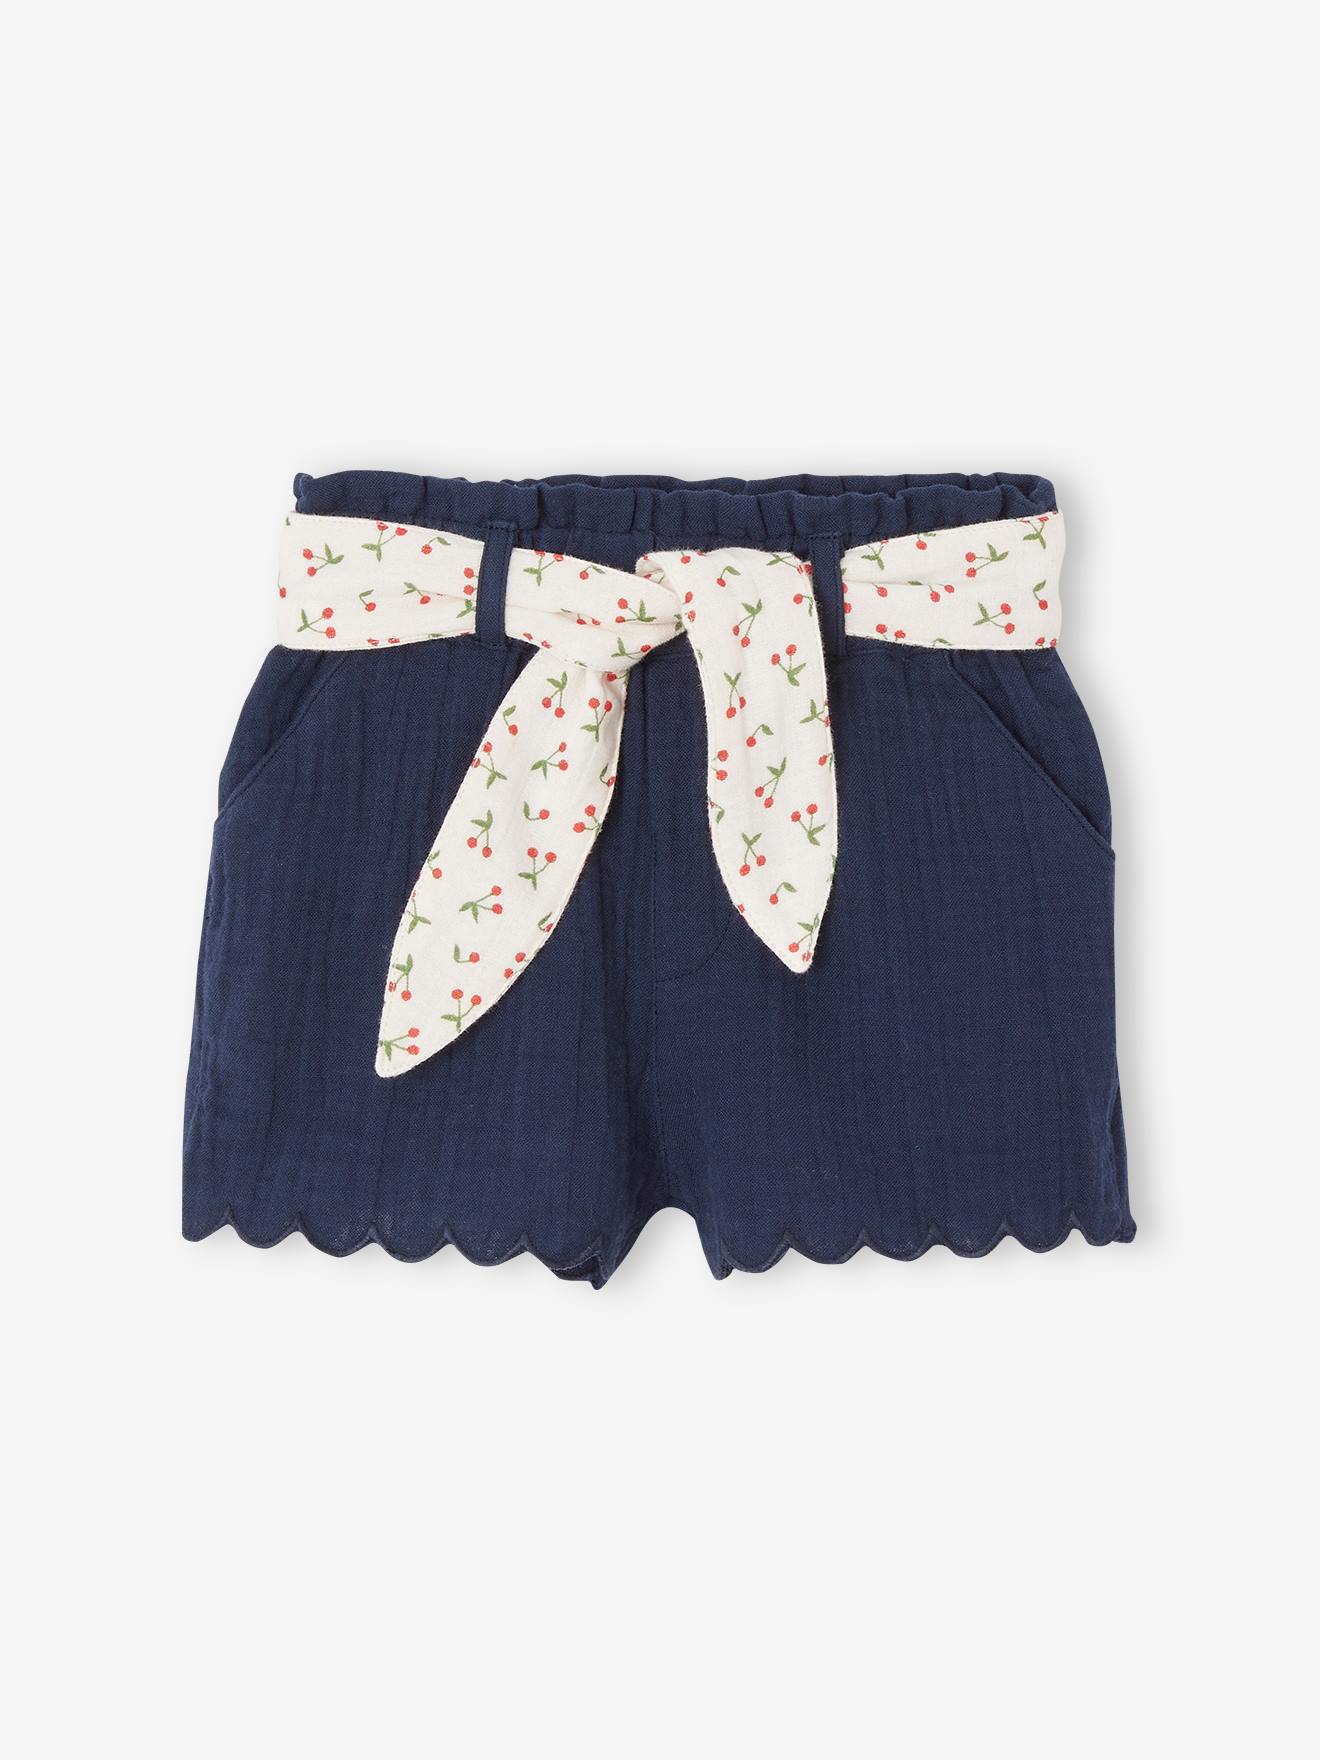 Cotton Gauze Shorts with Floral Belt for Babies navy blue